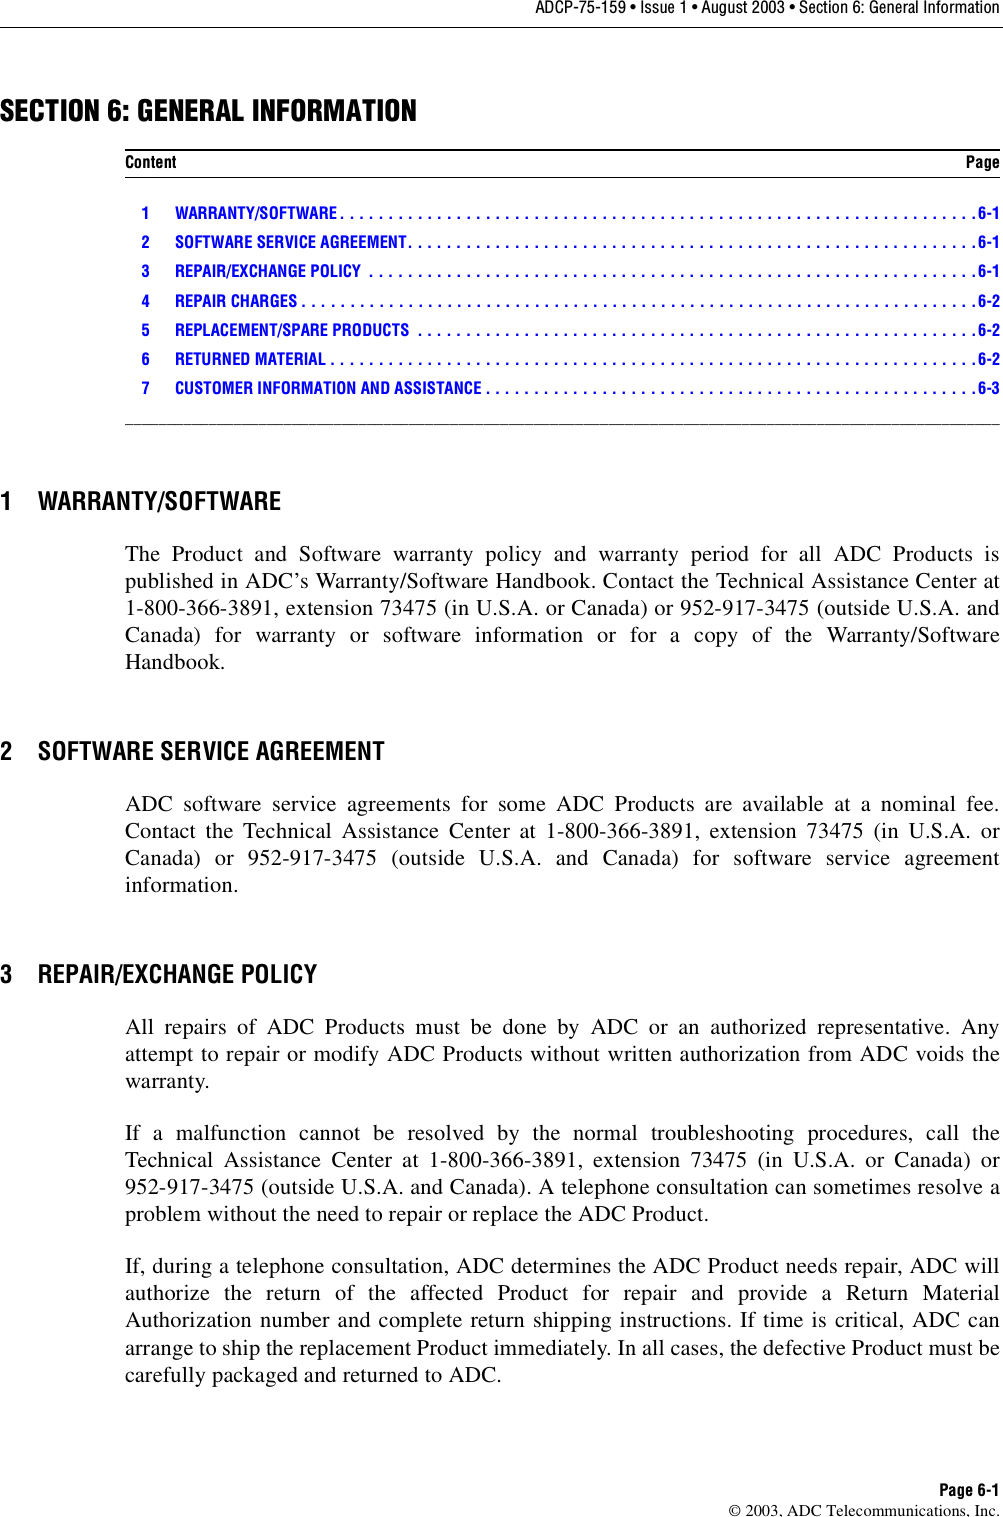 ADCP-75-159 • Issue 1 • August 2003 • Section 6: General InformationPage 6-1© 2003, ADC Telecommunications, Inc.SECTION 6: GENERAL INFORMATION1 WARRANTY/SOFTWARE . . . . . . . . . . . . . . . . . . . . . . . . . . . . . . . . . . . . . . . . . . . . . . . . . . . . . . . . . . . . . . . . . .6-12 SOFTWARE SERVICE AGREEMENT. . . . . . . . . . . . . . . . . . . . . . . . . . . . . . . . . . . . . . . . . . . . . . . . . . . . . . . . . . .6-13 REPAIR/EXCHANGE POLICY  . . . . . . . . . . . . . . . . . . . . . . . . . . . . . . . . . . . . . . . . . . . . . . . . . . . . . . . . . . . . . . .6-14 REPAIR CHARGES . . . . . . . . . . . . . . . . . . . . . . . . . . . . . . . . . . . . . . . . . . . . . . . . . . . . . . . . . . . . . . . . . . . . . .6-25 REPLACEMENT/SPARE PRODUCTS  . . . . . . . . . . . . . . . . . . . . . . . . . . . . . . . . . . . . . . . . . . . . . . . . . . . . . . . . . .6-26 RETURNED MATERIAL . . . . . . . . . . . . . . . . . . . . . . . . . . . . . . . . . . . . . . . . . . . . . . . . . . . . . . . . . . . . . . . . . . .6-27 CUSTOMER INFORMATION AND ASSISTANCE . . . . . . . . . . . . . . . . . . . . . . . . . . . . . . . . . . . . . . . . . . . . . . . . . . .6-3_________________________________________________________________________________________________________1 WARRANTY/SOFTWAREThe Product and Software warranty policy and warranty period for all ADC Products ispublished in ADC’s Warranty/Software Handbook. Contact the Technical Assistance Center at1-800-366-3891, extension 73475 (in U.S.A. or Canada) or 952-917-3475 (outside U.S.A. andCanada) for warranty or software information or for a copy of the Warranty/SoftwareHandbook.2 SOFTWARE SERVICE AGREEMENTADC software service agreements for some ADC Products are available at a nominal fee.Contact the Technical Assistance Center at 1-800-366-3891, extension 73475 (in U.S.A. orCanada) or 952-917-3475 (outside U.S.A. and Canada) for software service agreementinformation.3 REPAIR/EXCHANGE POLICYAll repairs of ADC Products must be done by ADC or an authorized representative. Anyattempt to repair or modify ADC Products without written authorization from ADC voids thewarranty.If a malfunction cannot be resolved by the normal troubleshooting procedures, call theTechnical Assistance Center at 1-800-366-3891, extension 73475 (in U.S.A. or Canada) or952-917-3475 (outside U.S.A. and Canada). A telephone consultation can sometimes resolve aproblem without the need to repair or replace the ADC Product.If, during a telephone consultation, ADC determines the ADC Product needs repair, ADC willauthorize the return of the affected Product for repair and provide a Return MaterialAuthorization number and complete return shipping instructions. If time is critical, ADC canarrange to ship the replacement Product immediately. In all cases, the defective Product must becarefully packaged and returned to ADC.Content Page